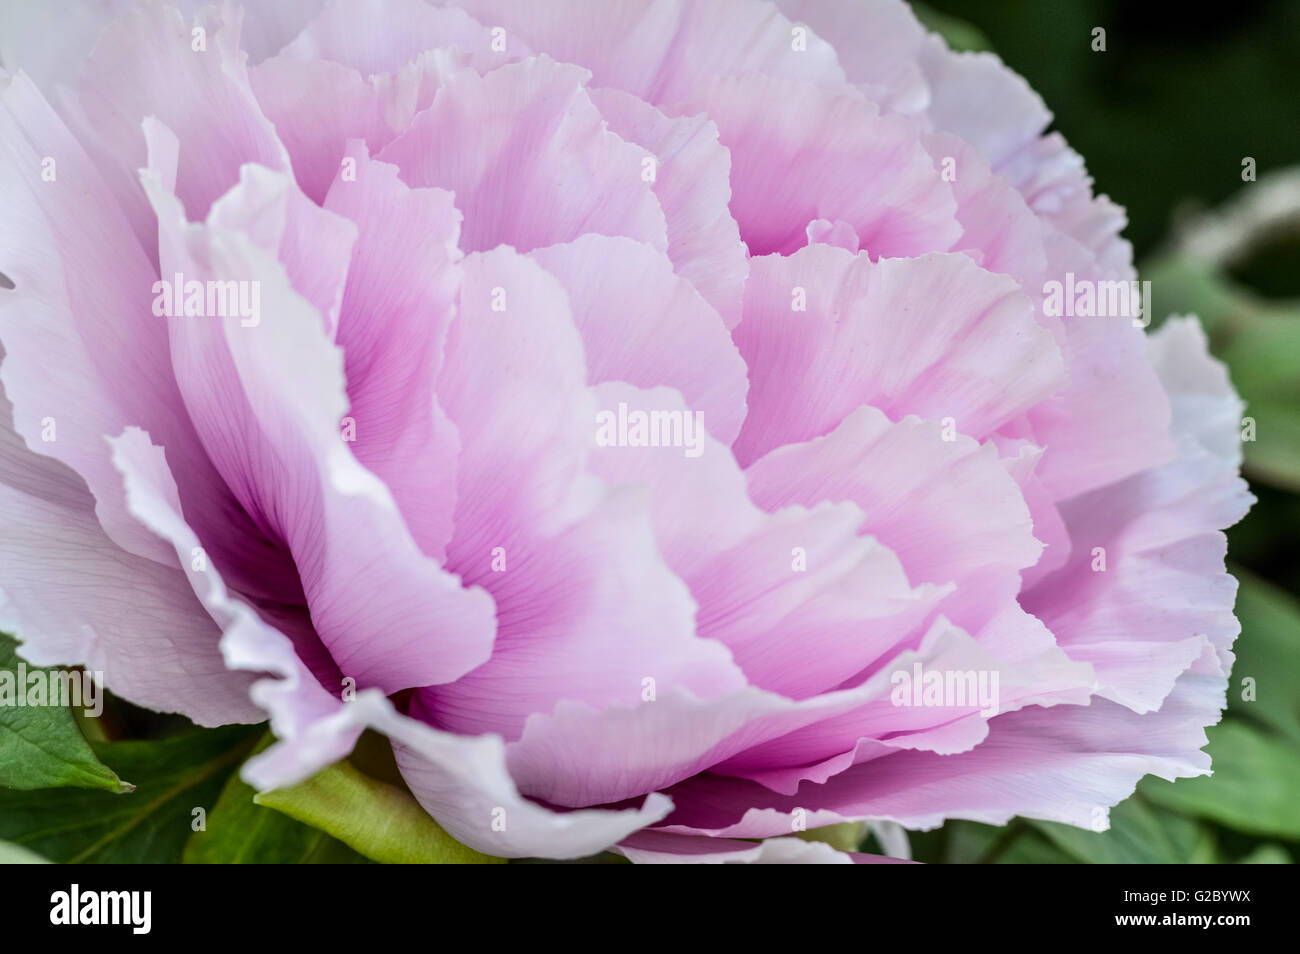 close up of a soft pink giant peony flowerhead Stock Photo